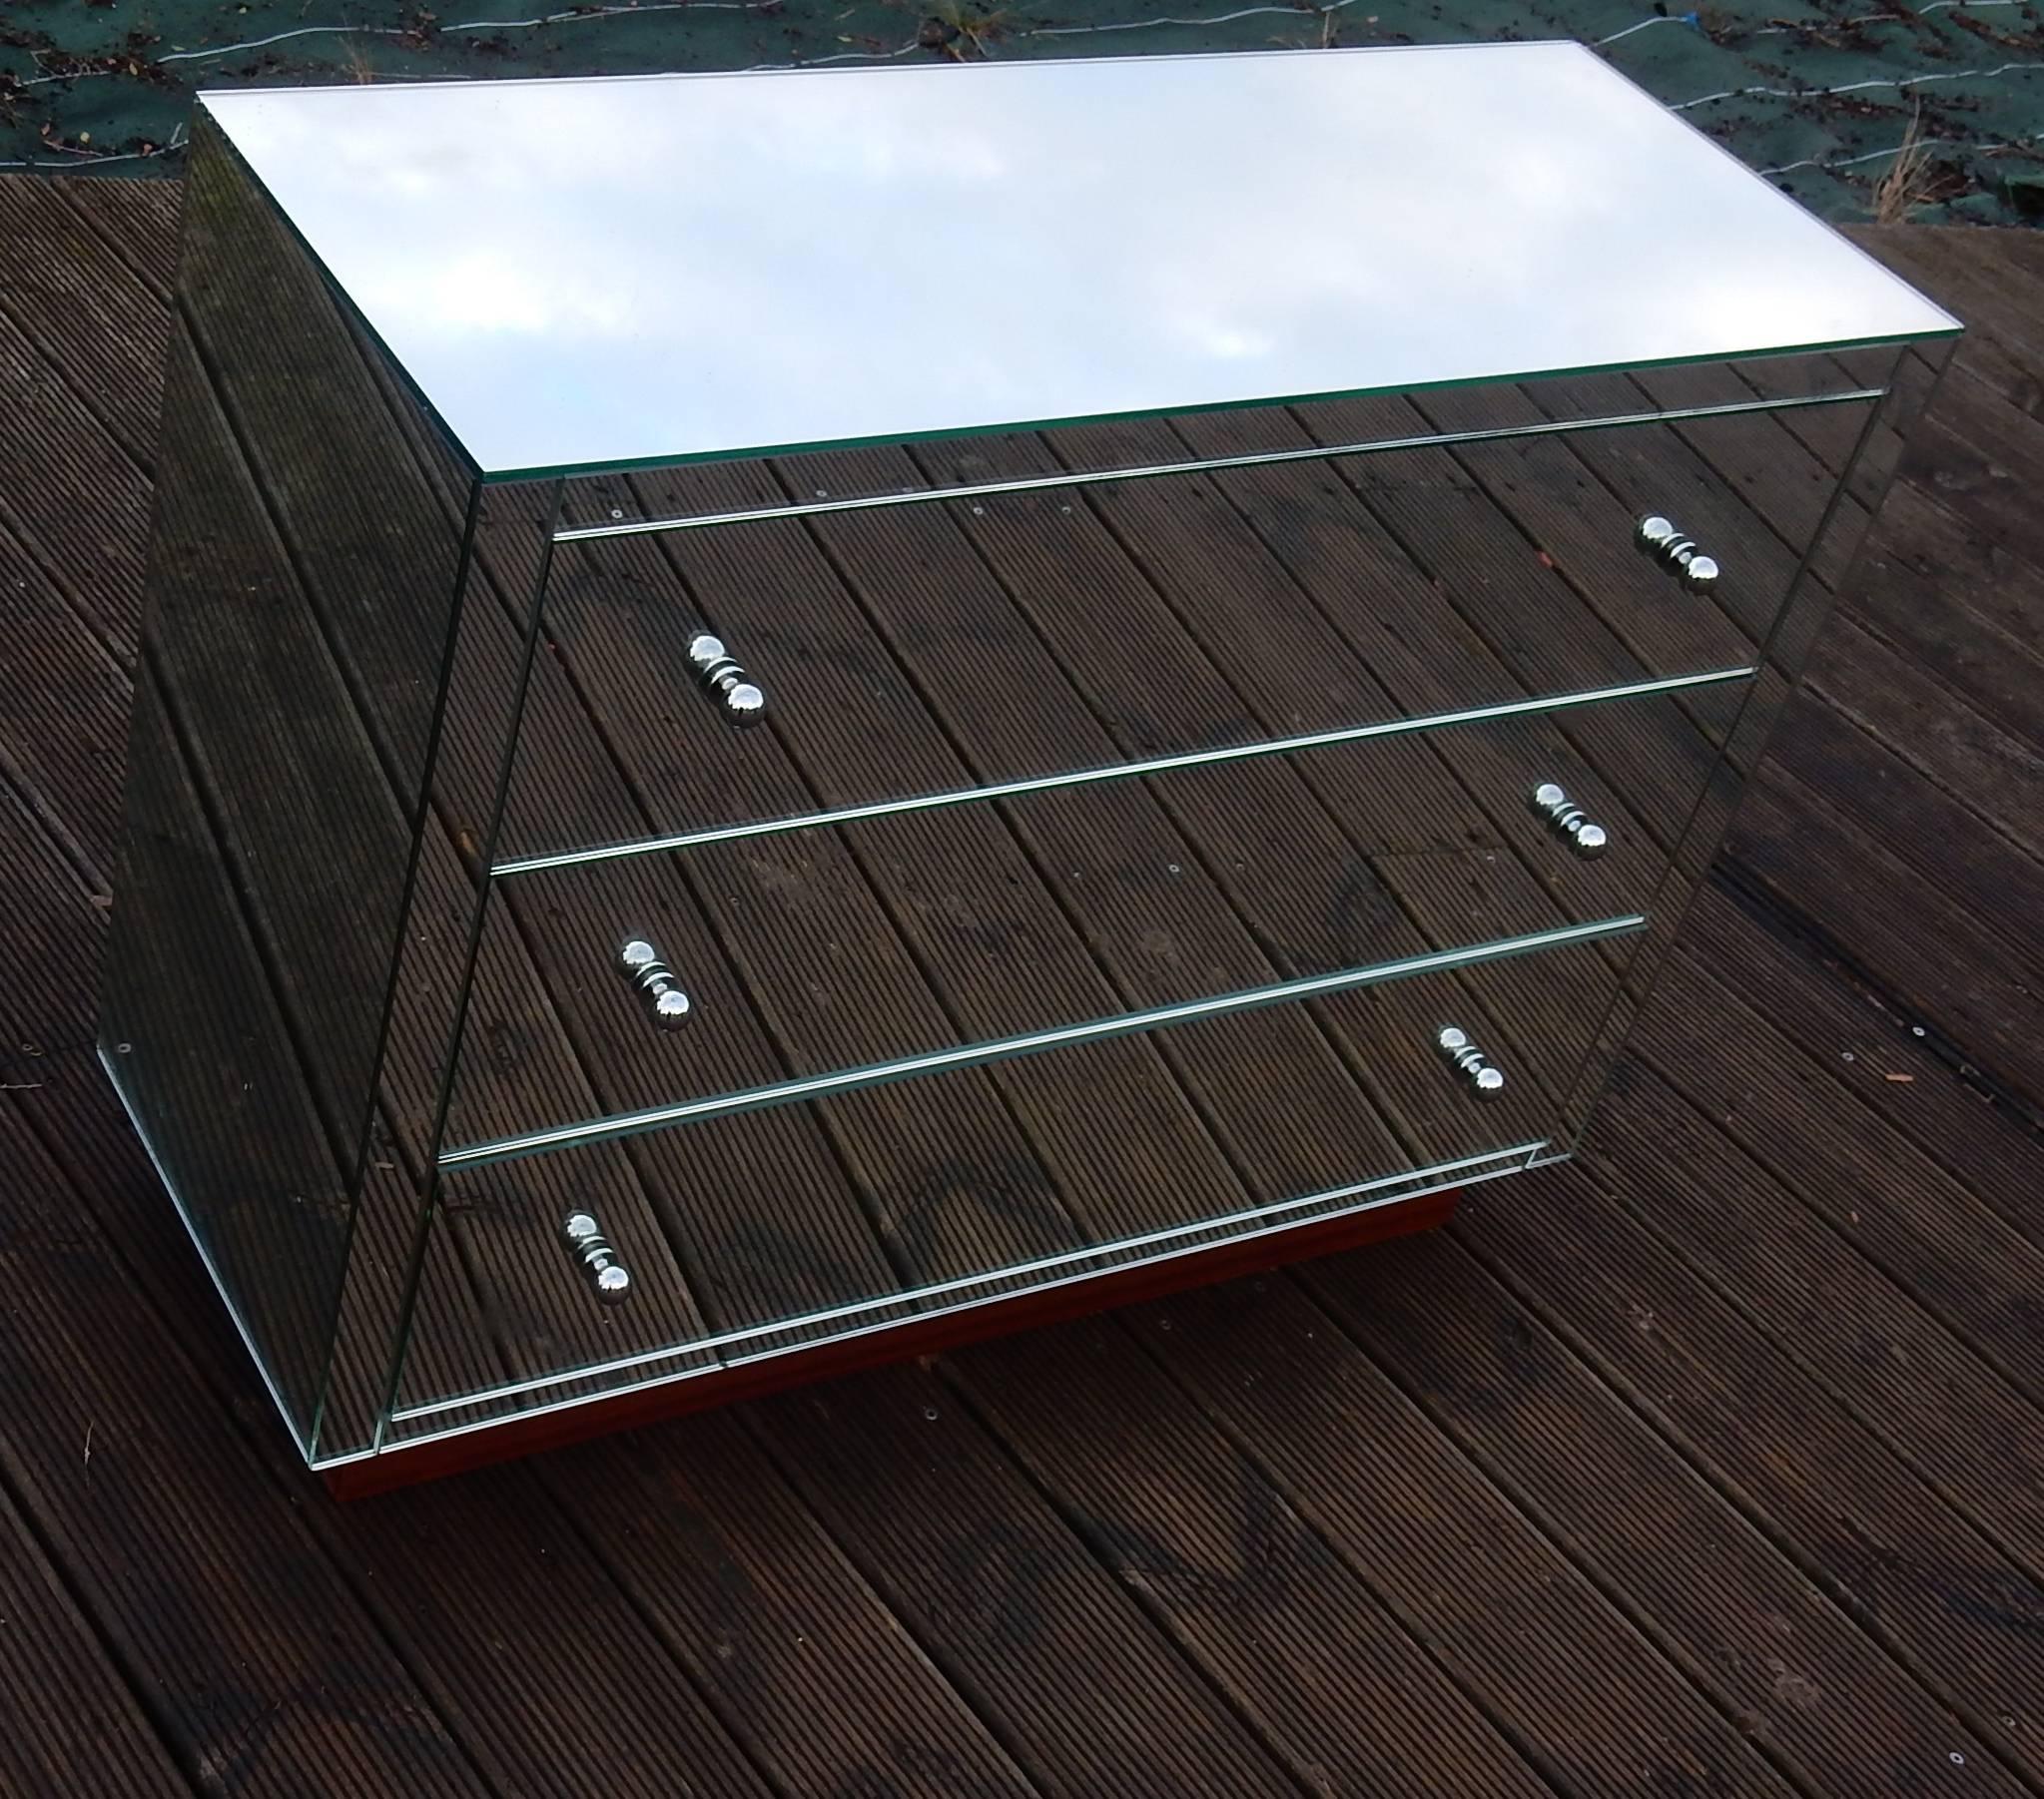 Chest of drawers art deco covered by mirrors on plinth, three drawers six chrome buttons, circa 1940-1950, good condition original,
drawers mounted with dovetail! Guaranteed quality of manufacture by a cabinetmaker.